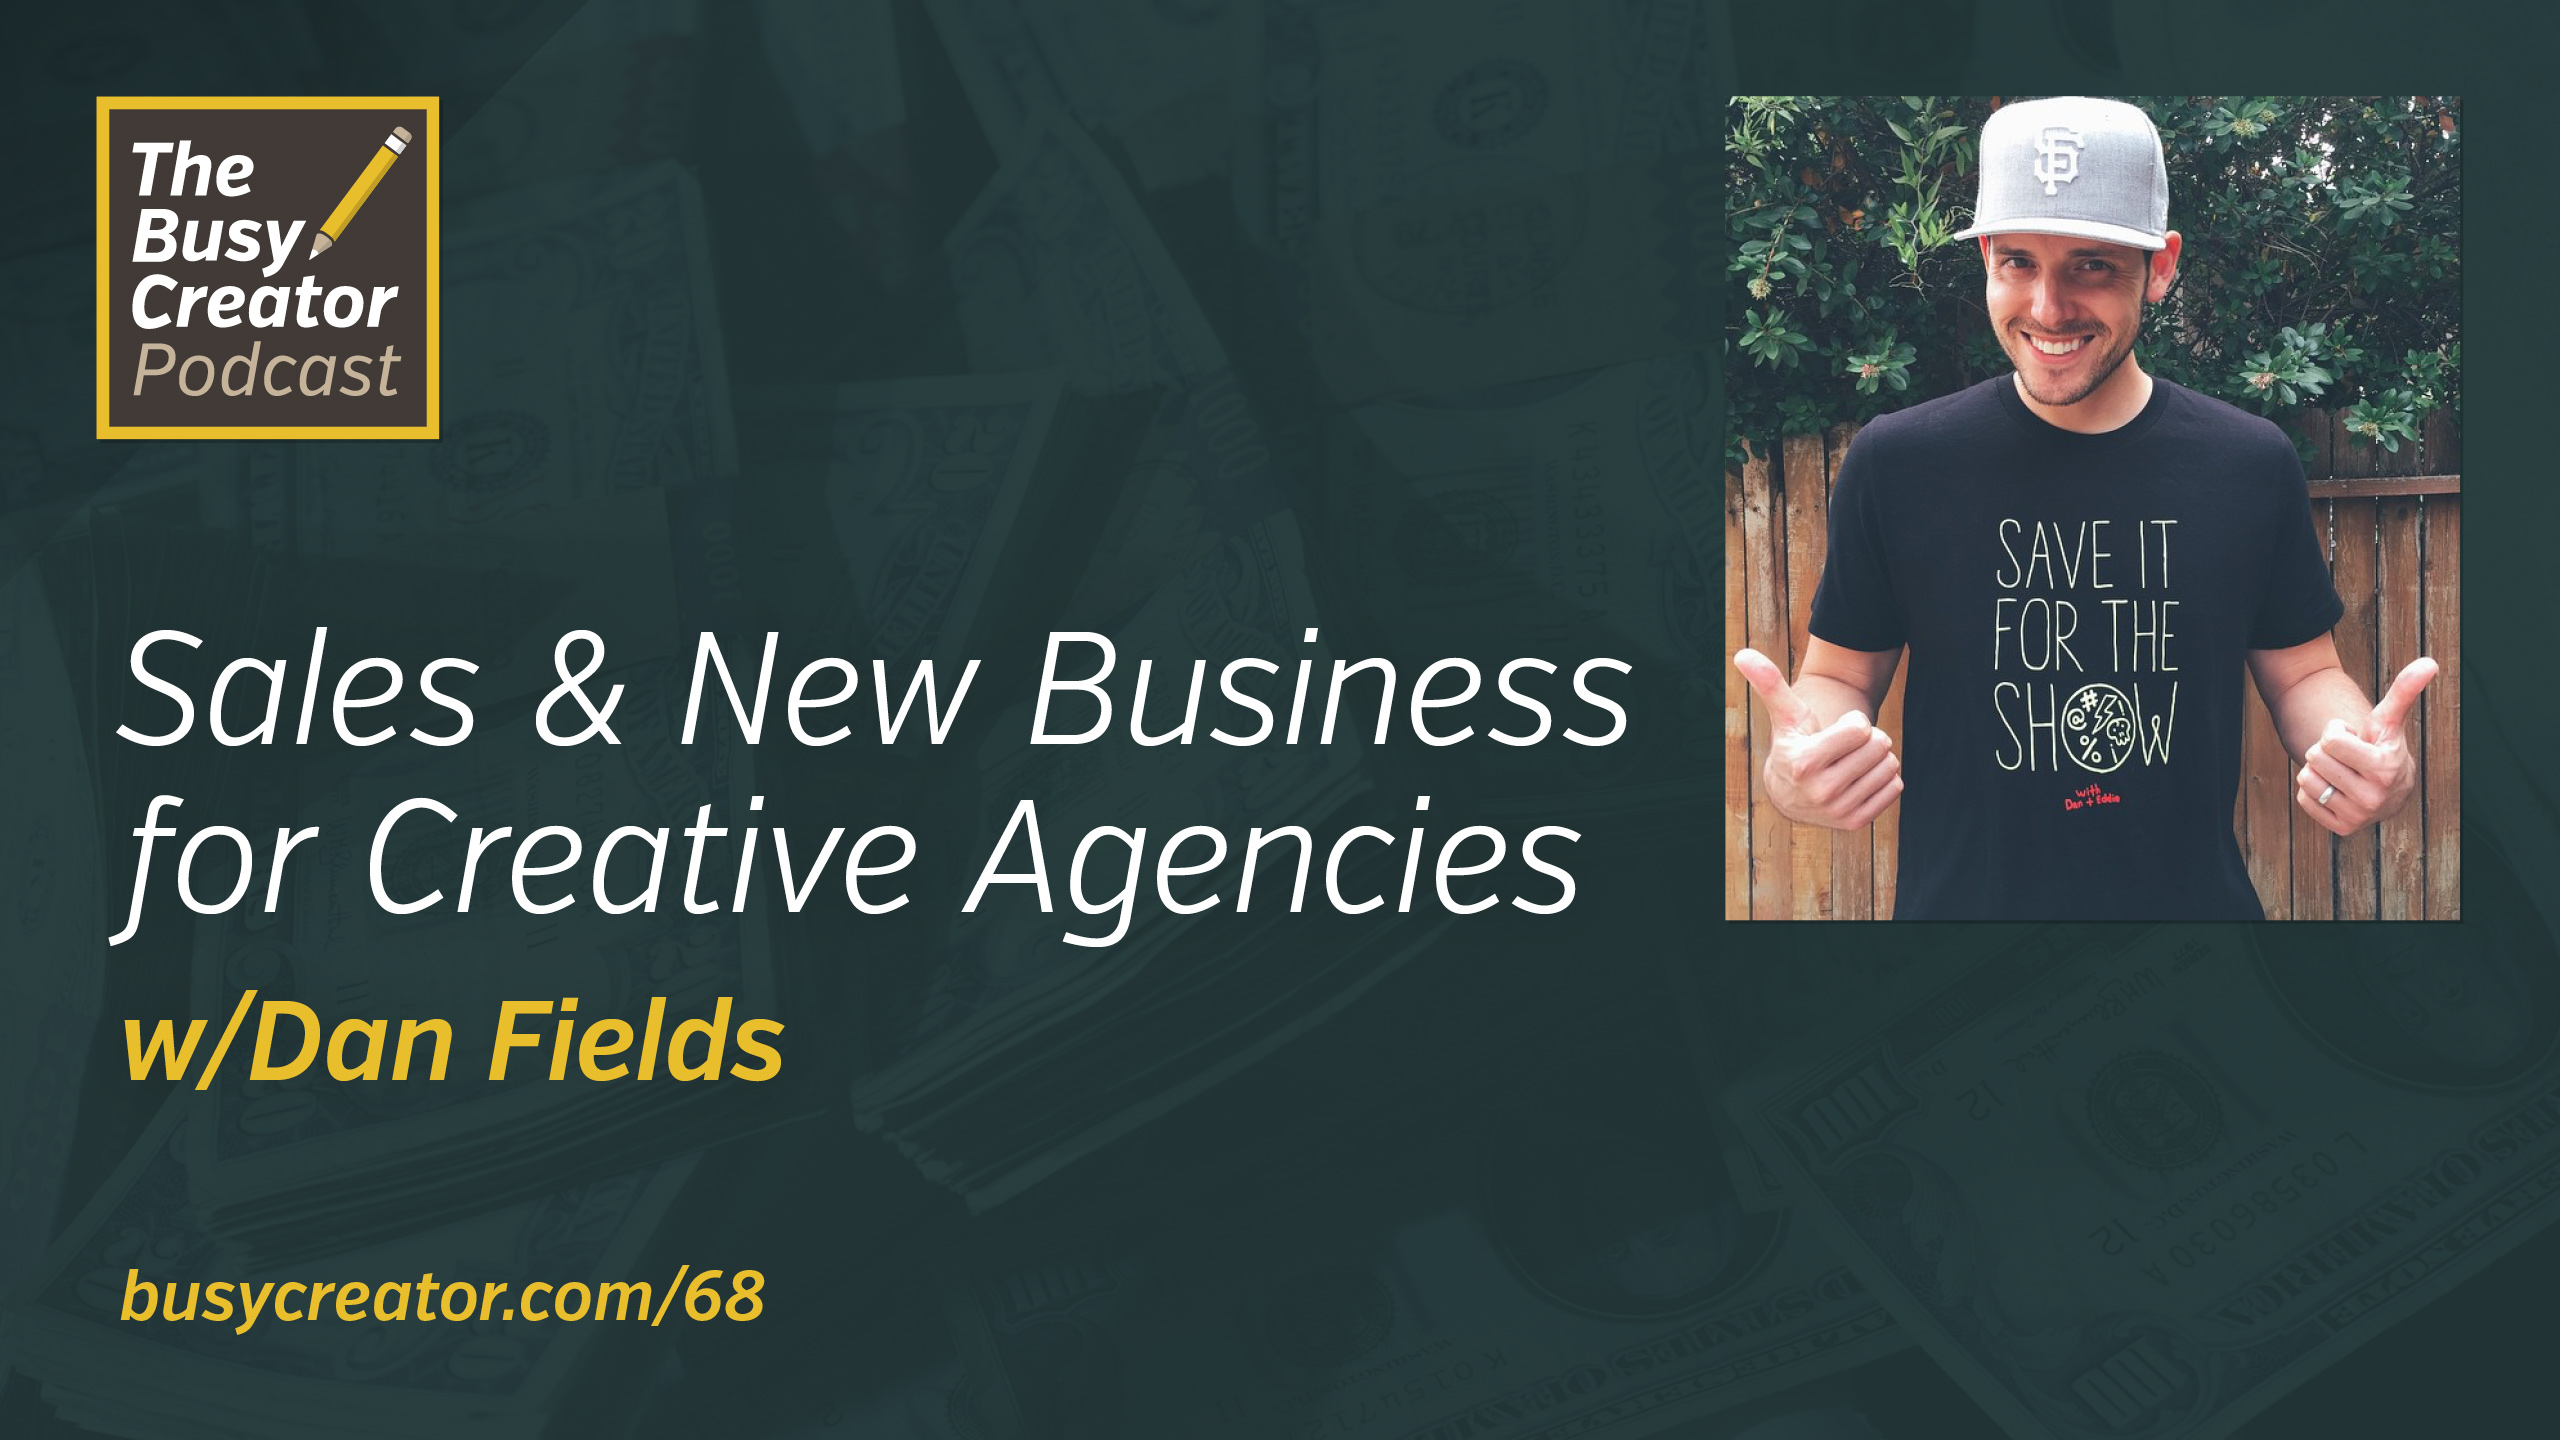 The Importance of Sales & New Business in Creative Agencies, with Dan Fields